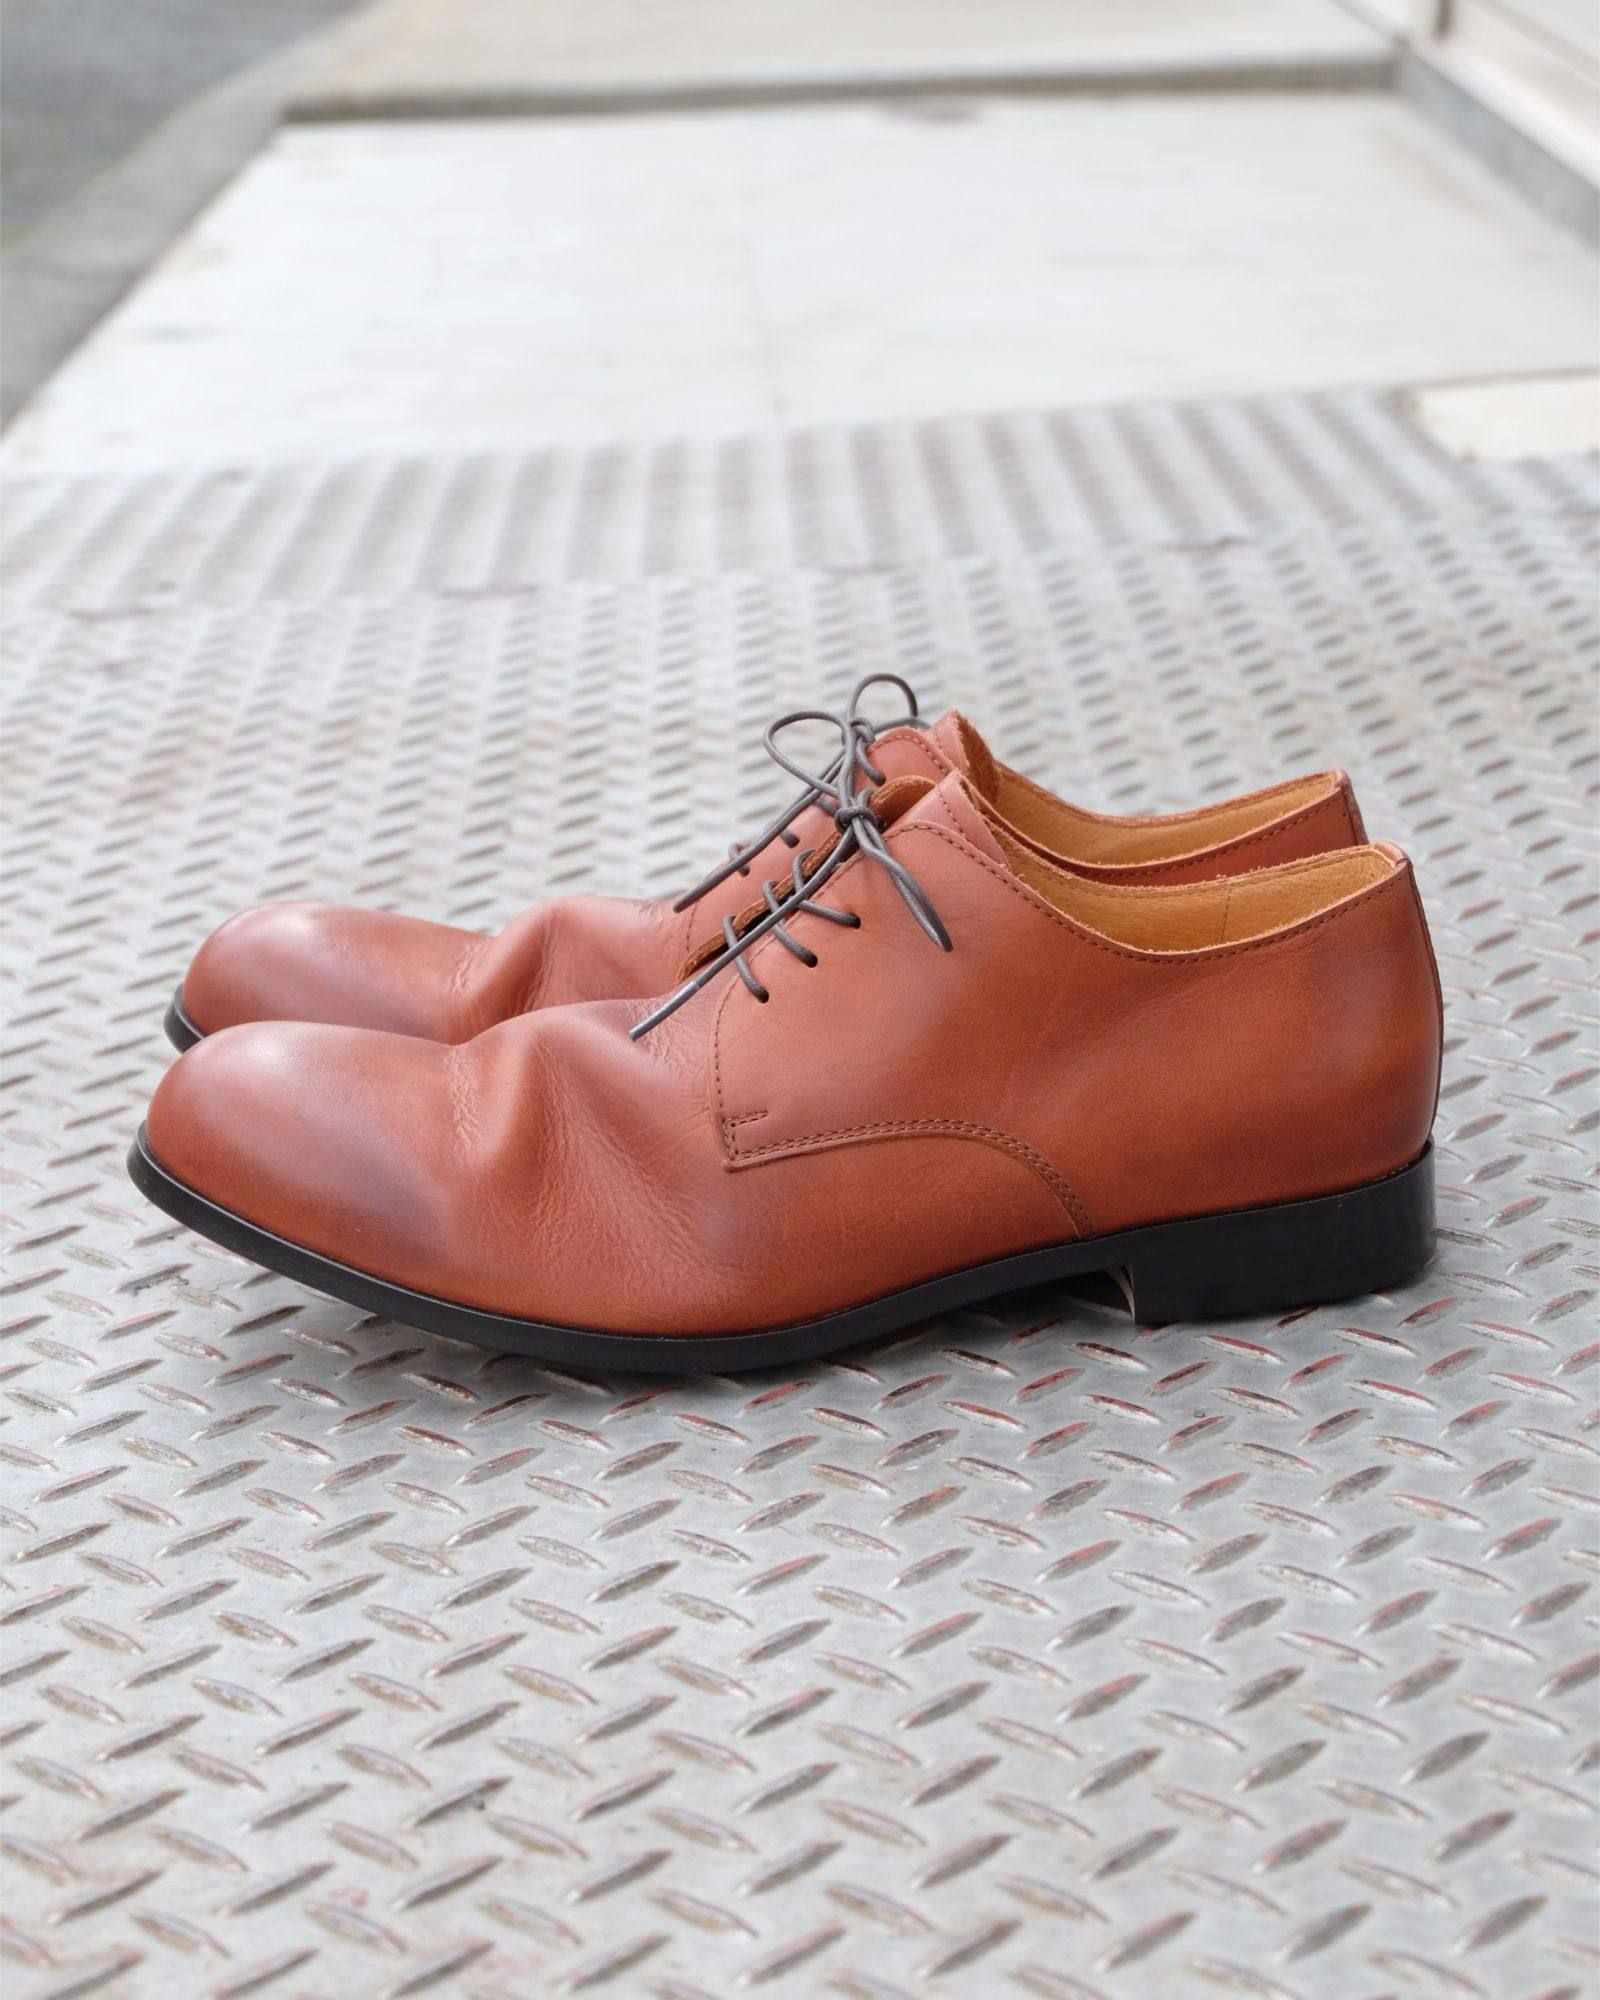 PADRONE - 【Size41 残り1】 ダービープレーントゥシューズ JACK (CAMEL) PU7358-2001-11C | ROSSO